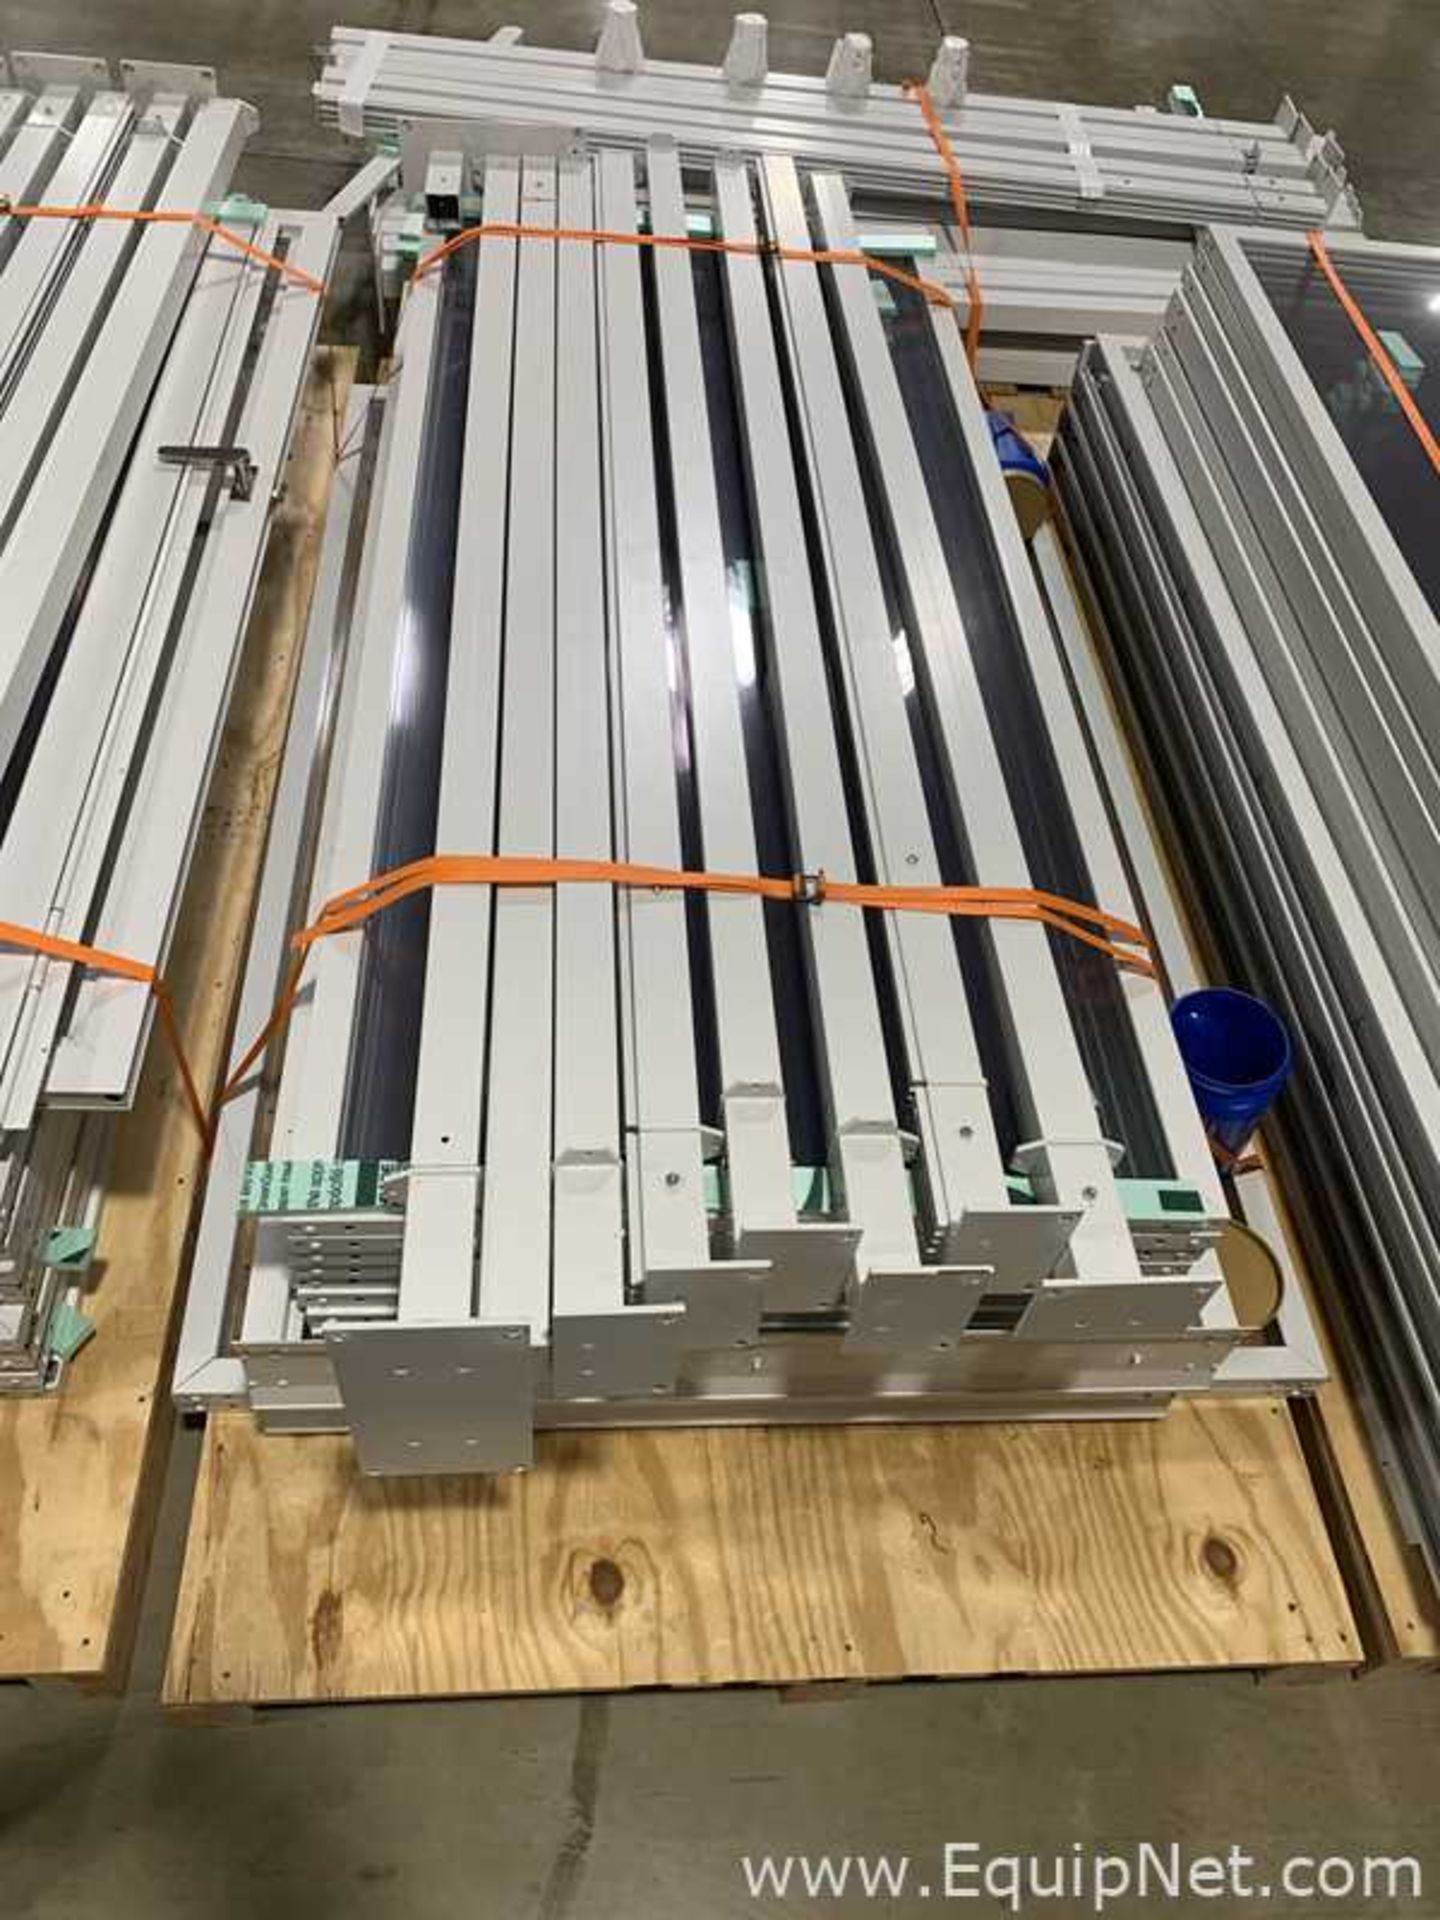 Lot of Aluminum and Plexiglas Safety Guarding - 188 Linear Ft. - Image 6 of 9